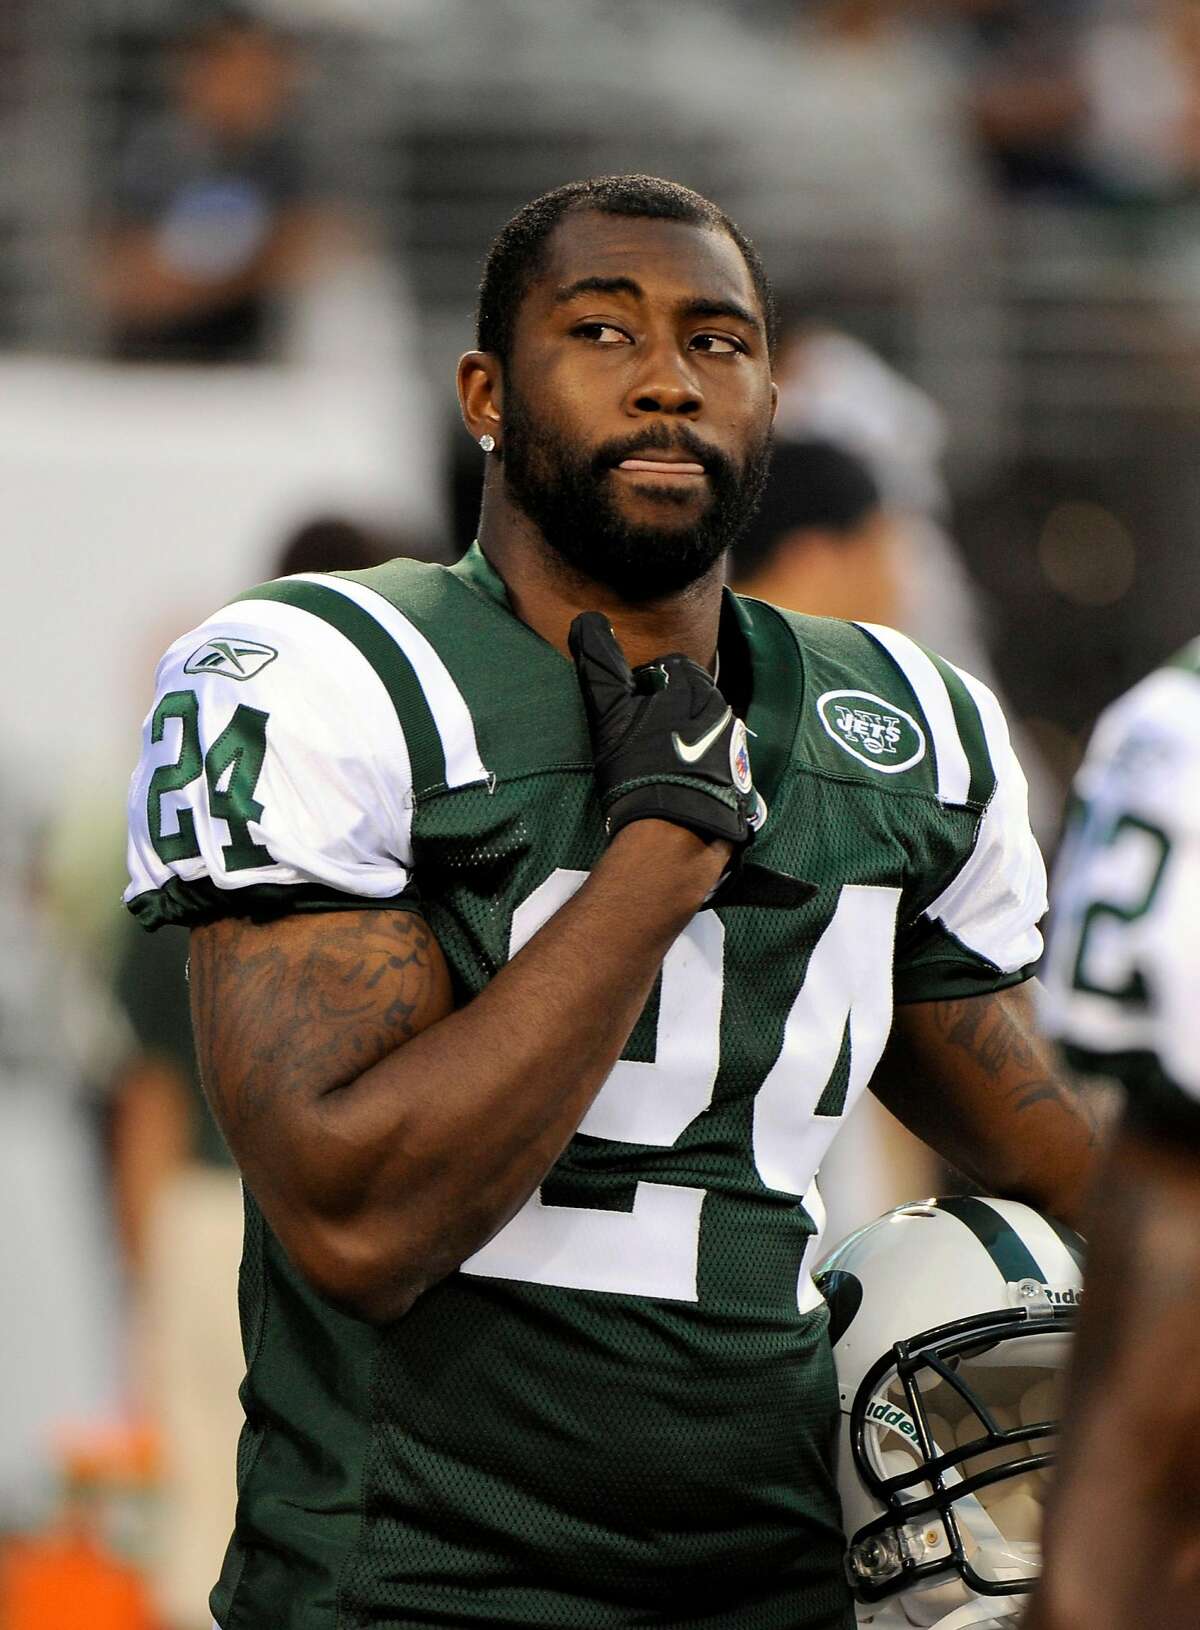 Is Darrelle Revis a better corner than Deion Sanders in his first